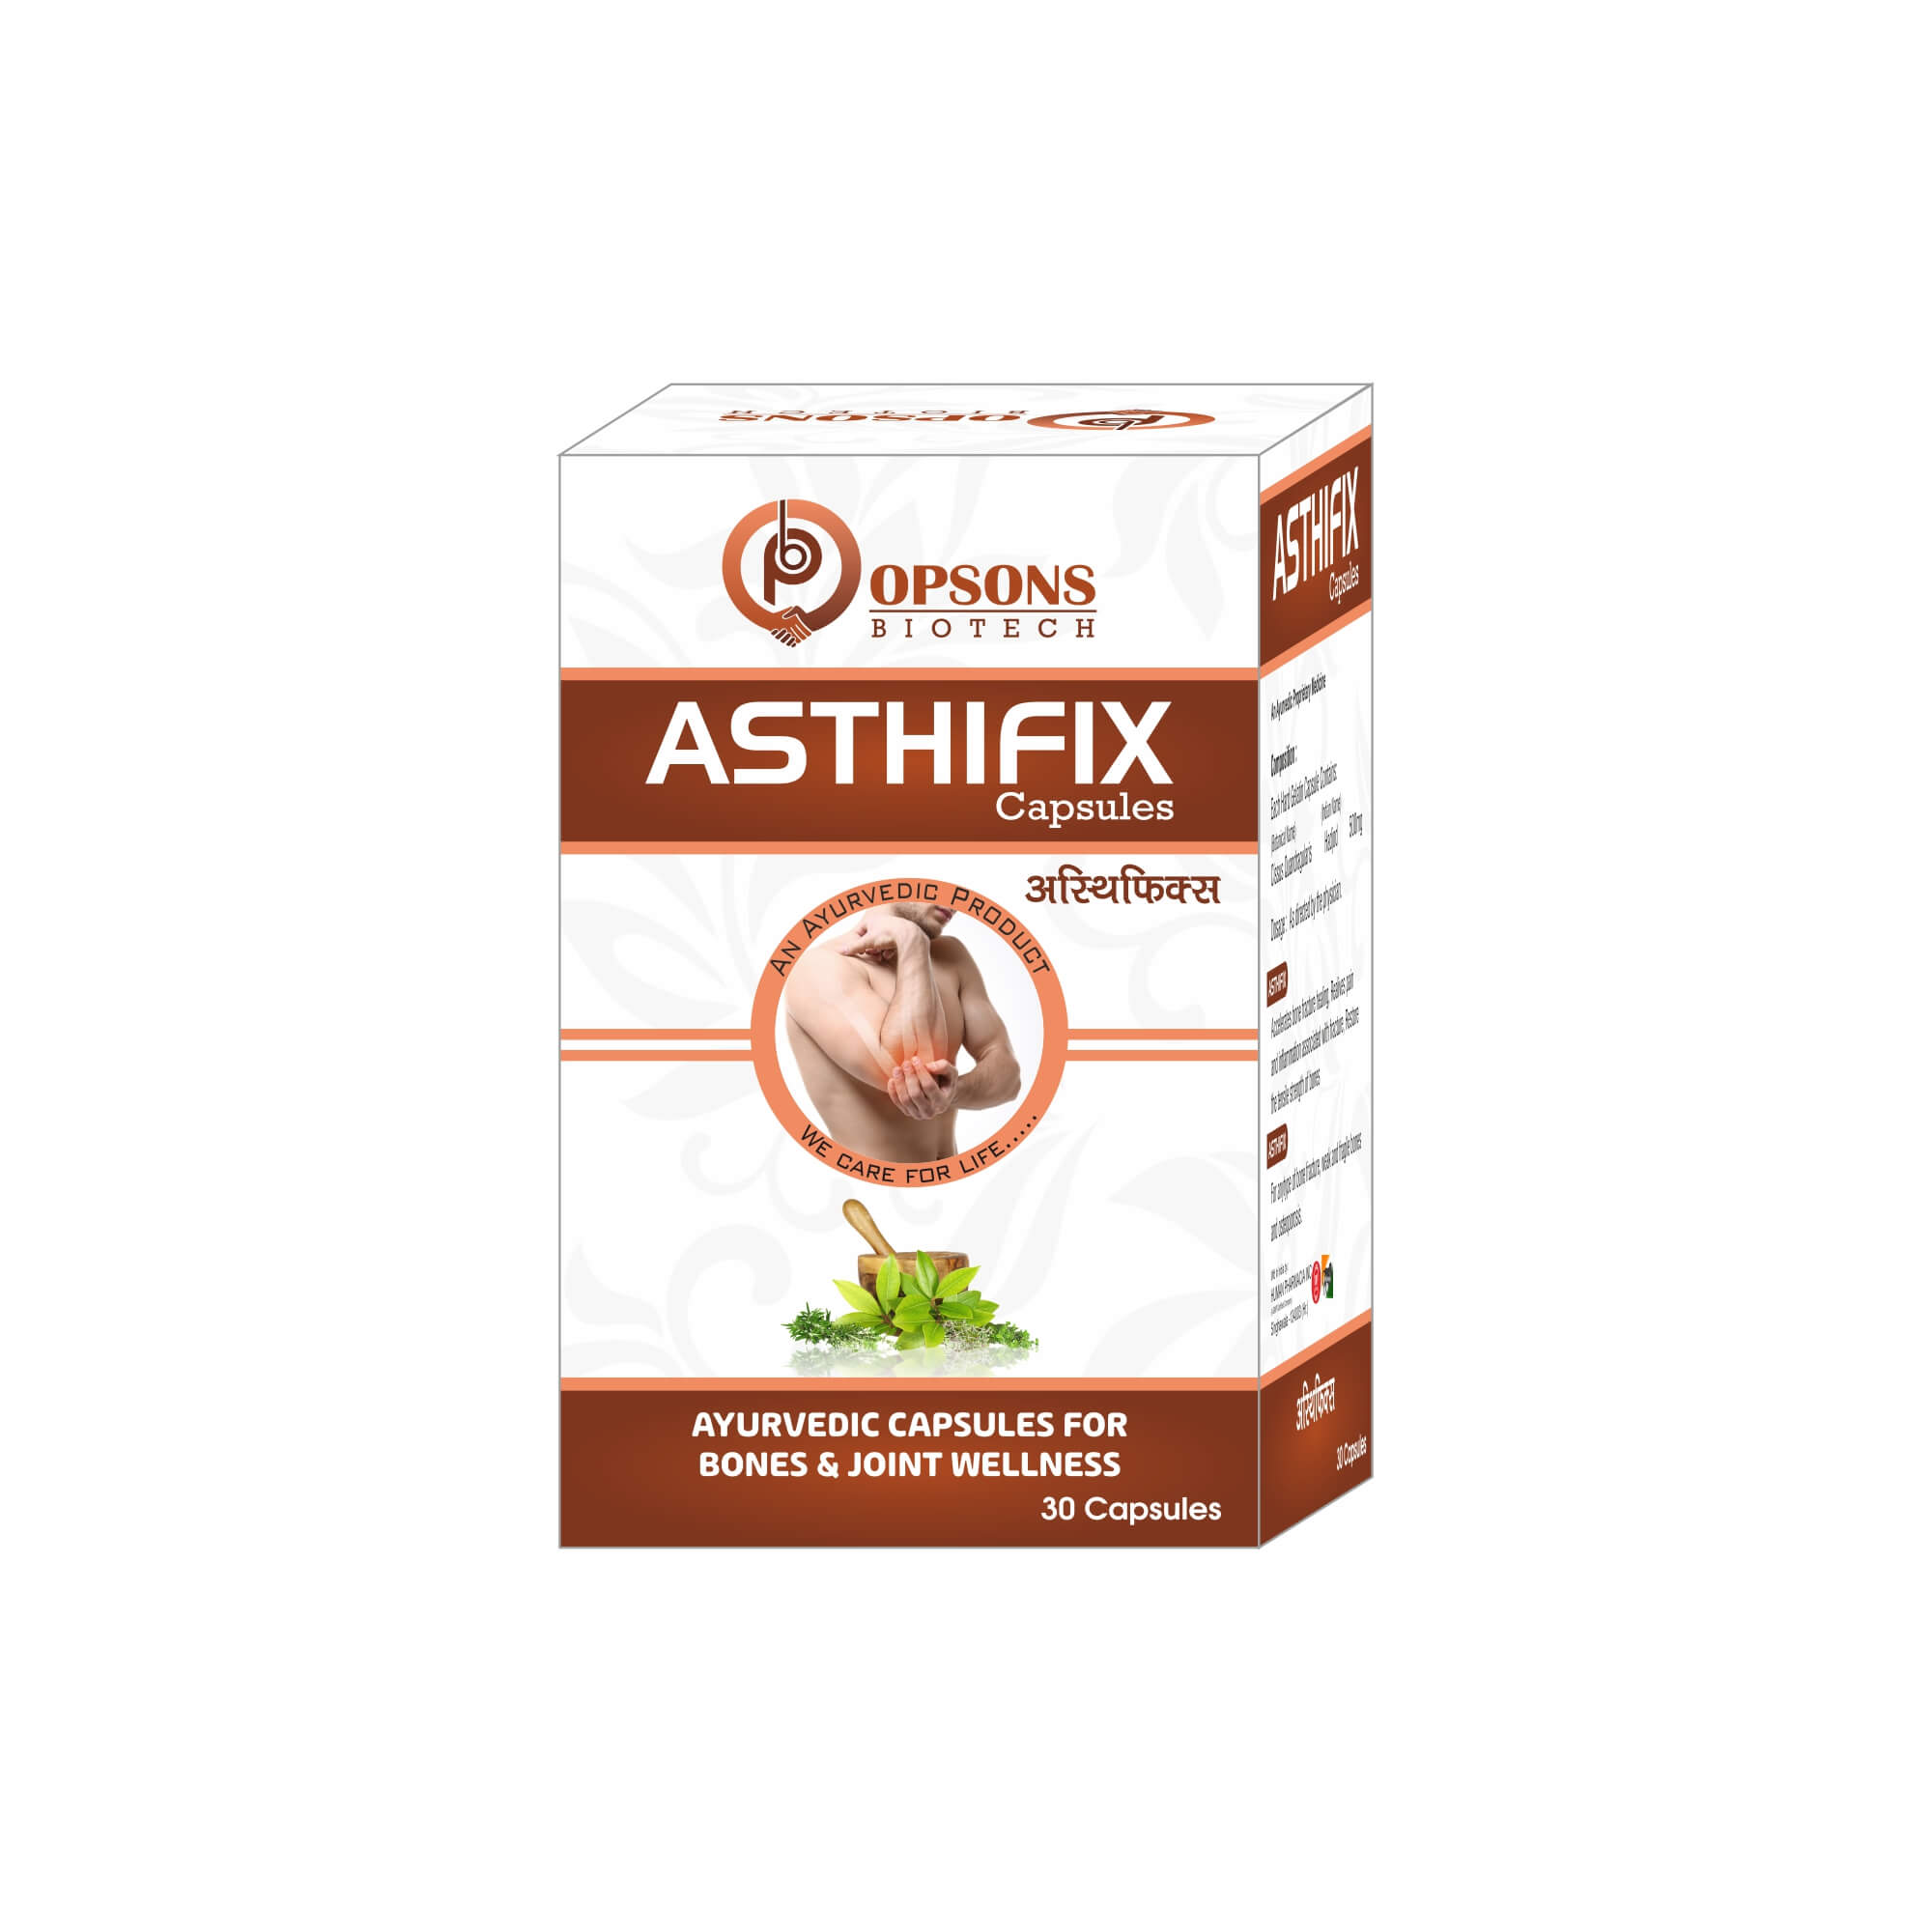 Product Name: Asthifix Caspsules, Compositions of Asthifix Caspsules are Ayurvedic Capsules For Bones Joint Wellness - Opsons Biotech